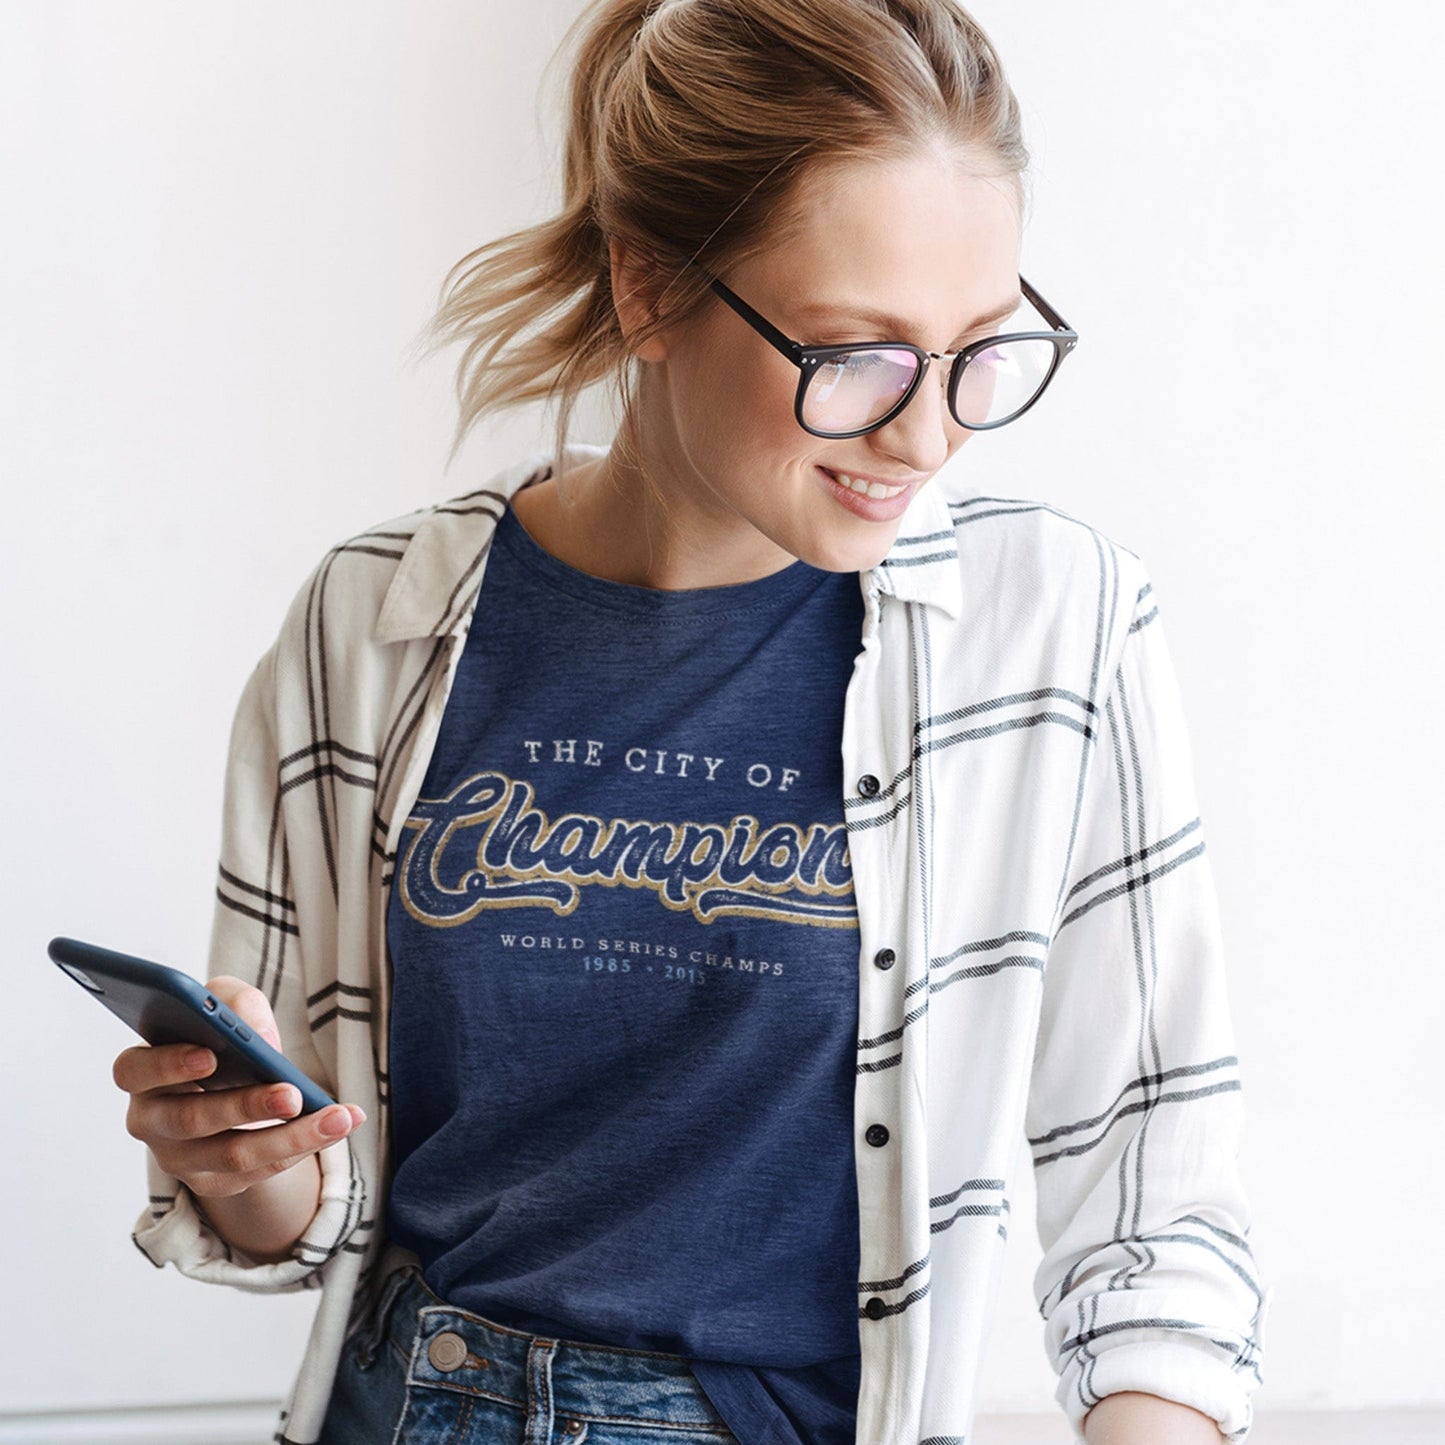 KC Swag Kansas City Royals white/gold CITY OF CHAMPIONS on heather navy t-shirt worn by female model under an open white plaid shirt holding phone